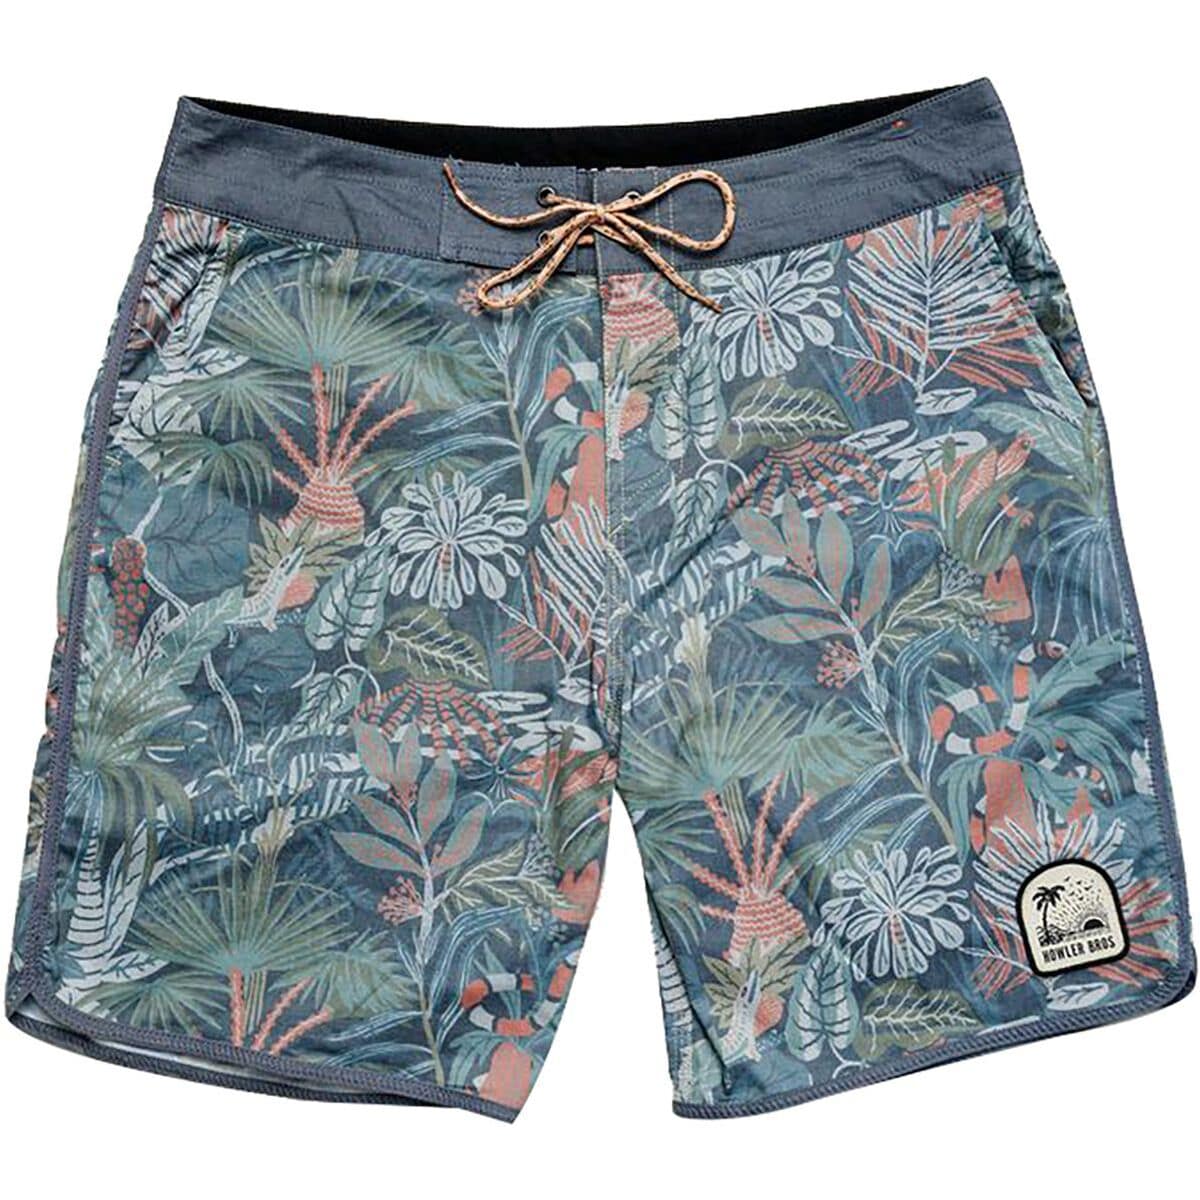 Howler Brothers Bruja Stretch Board Short - Men's | Backcountry.com